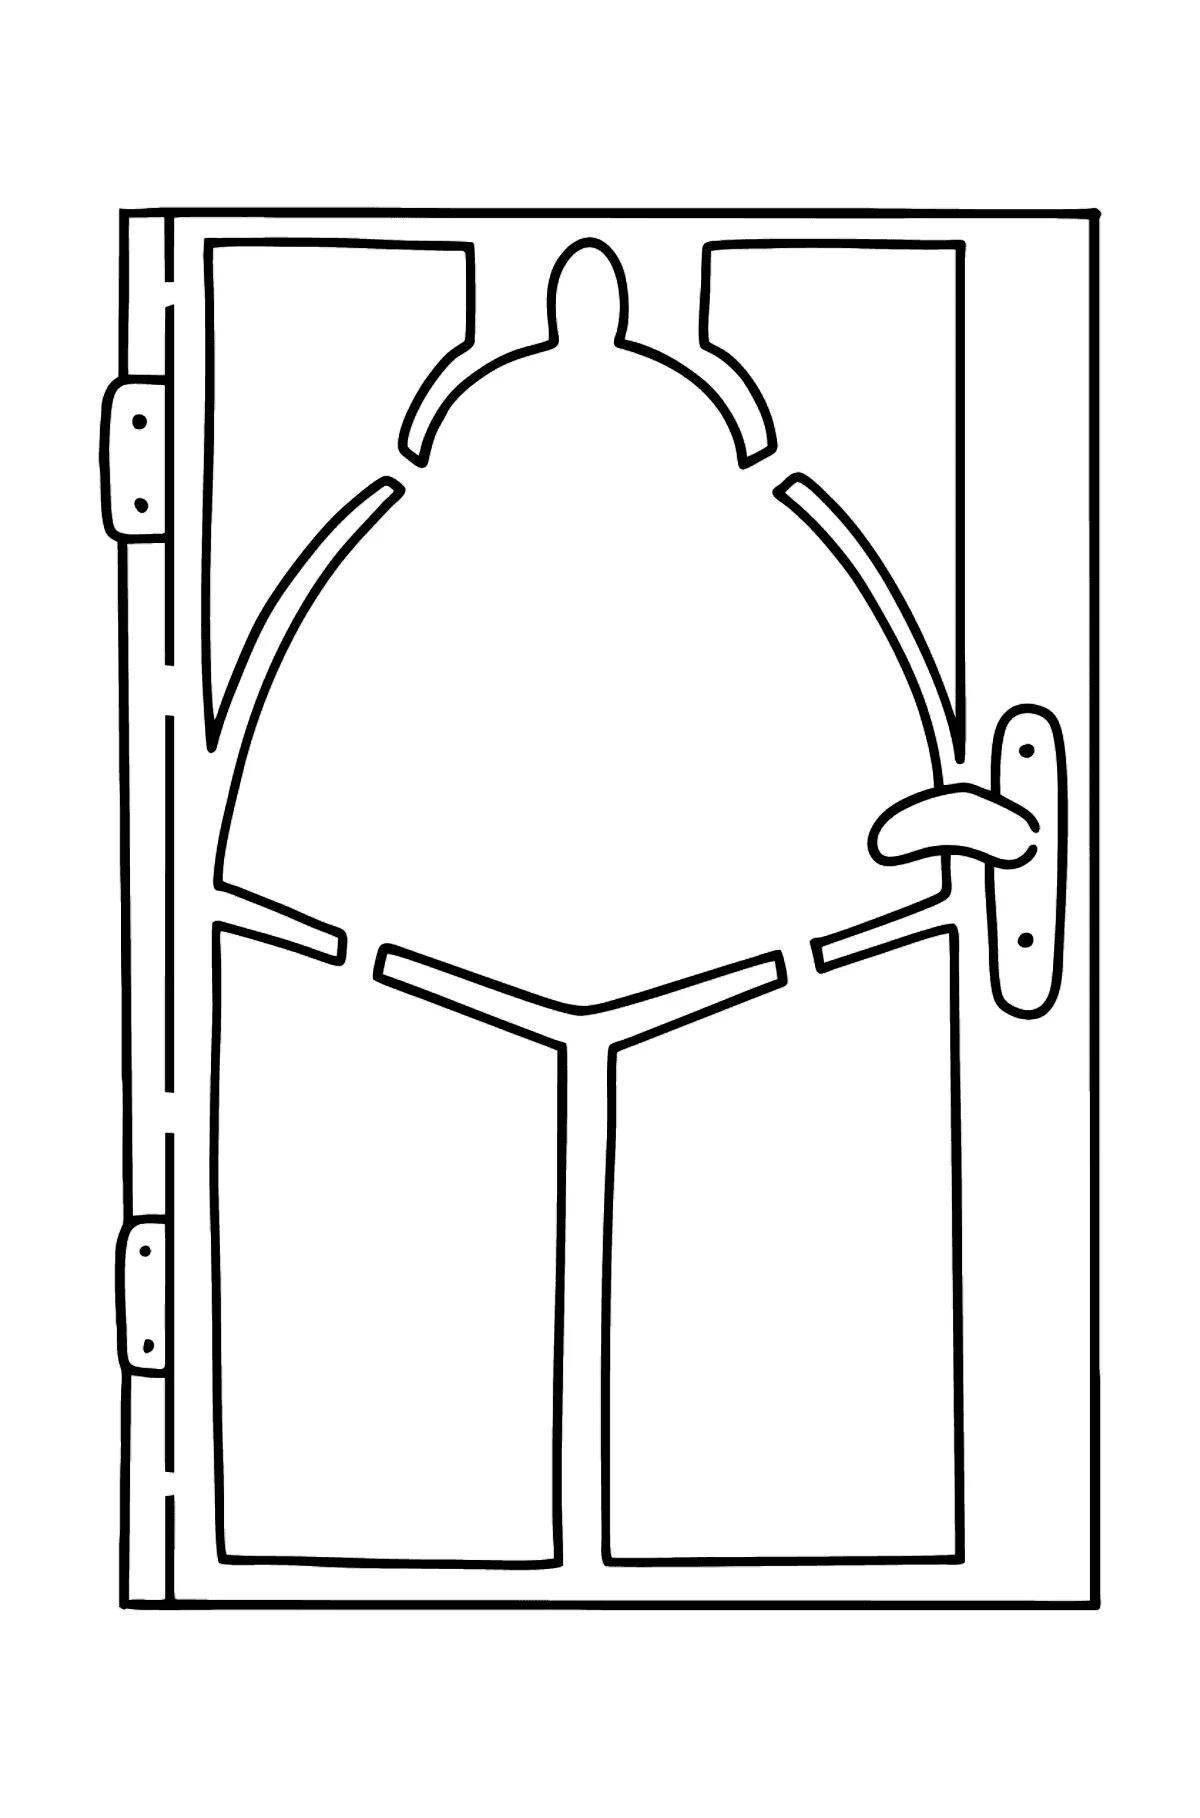 Playful door coloring page for kids